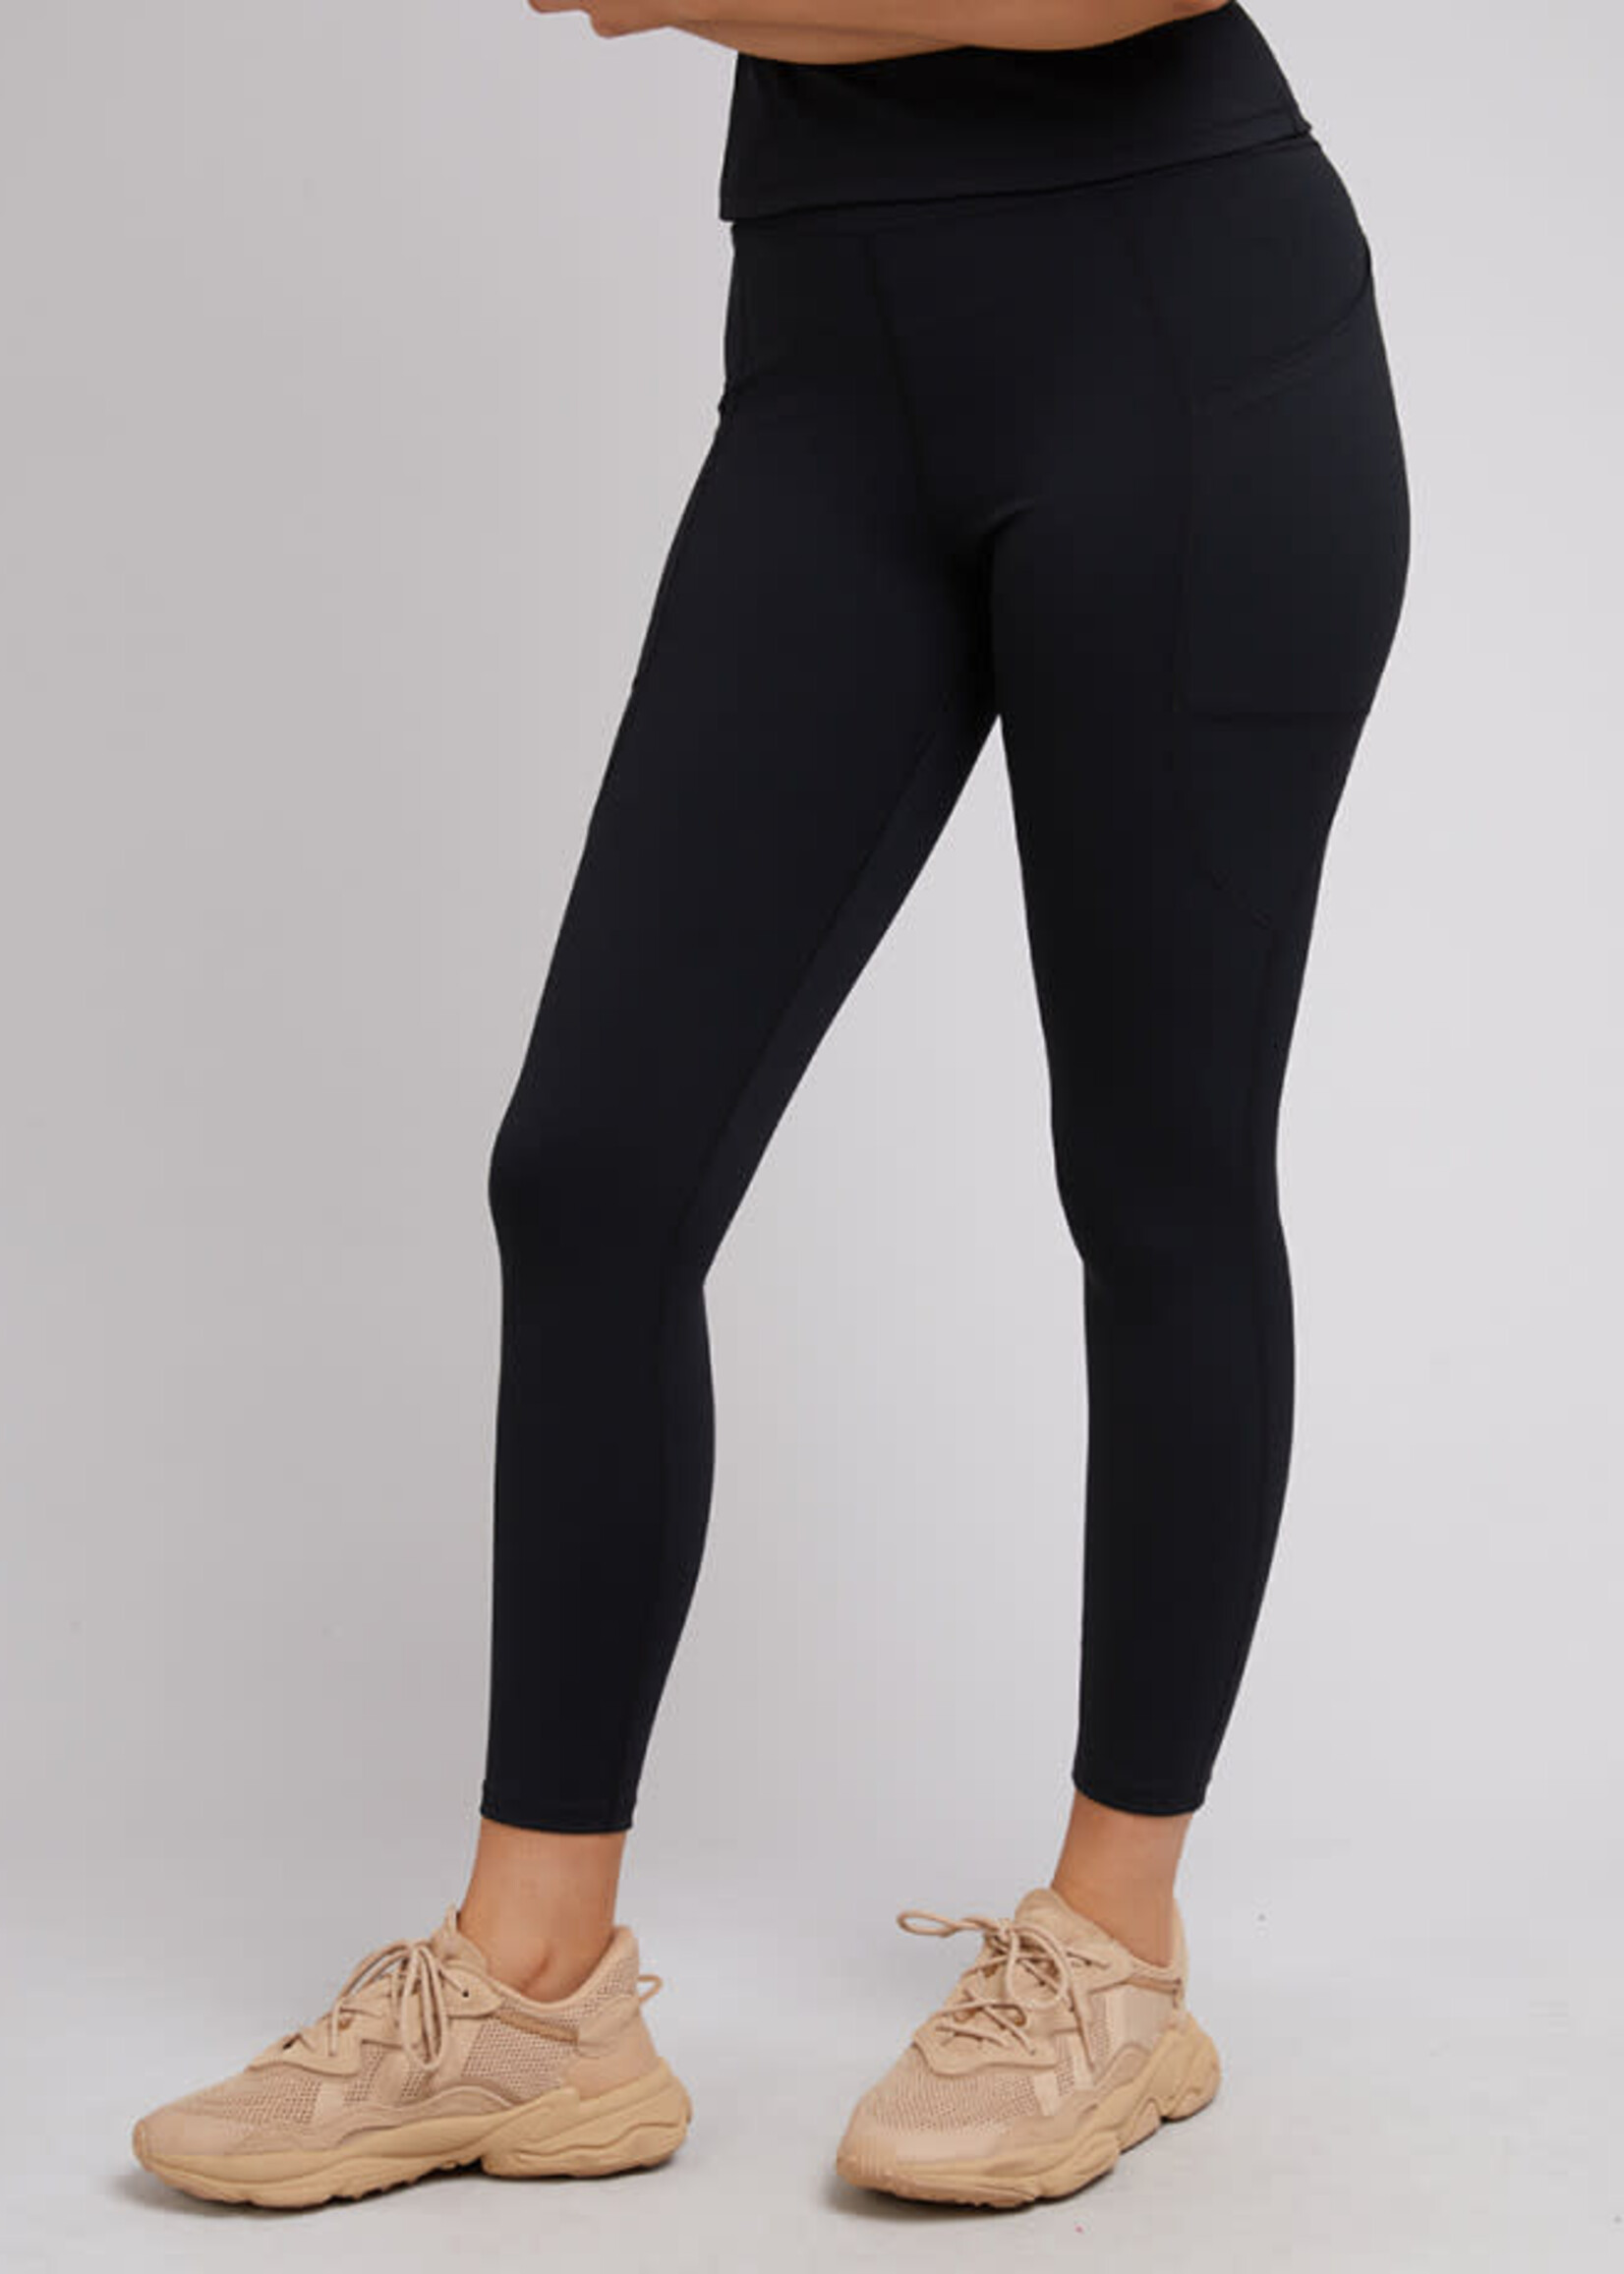 All About Eve Active Legging